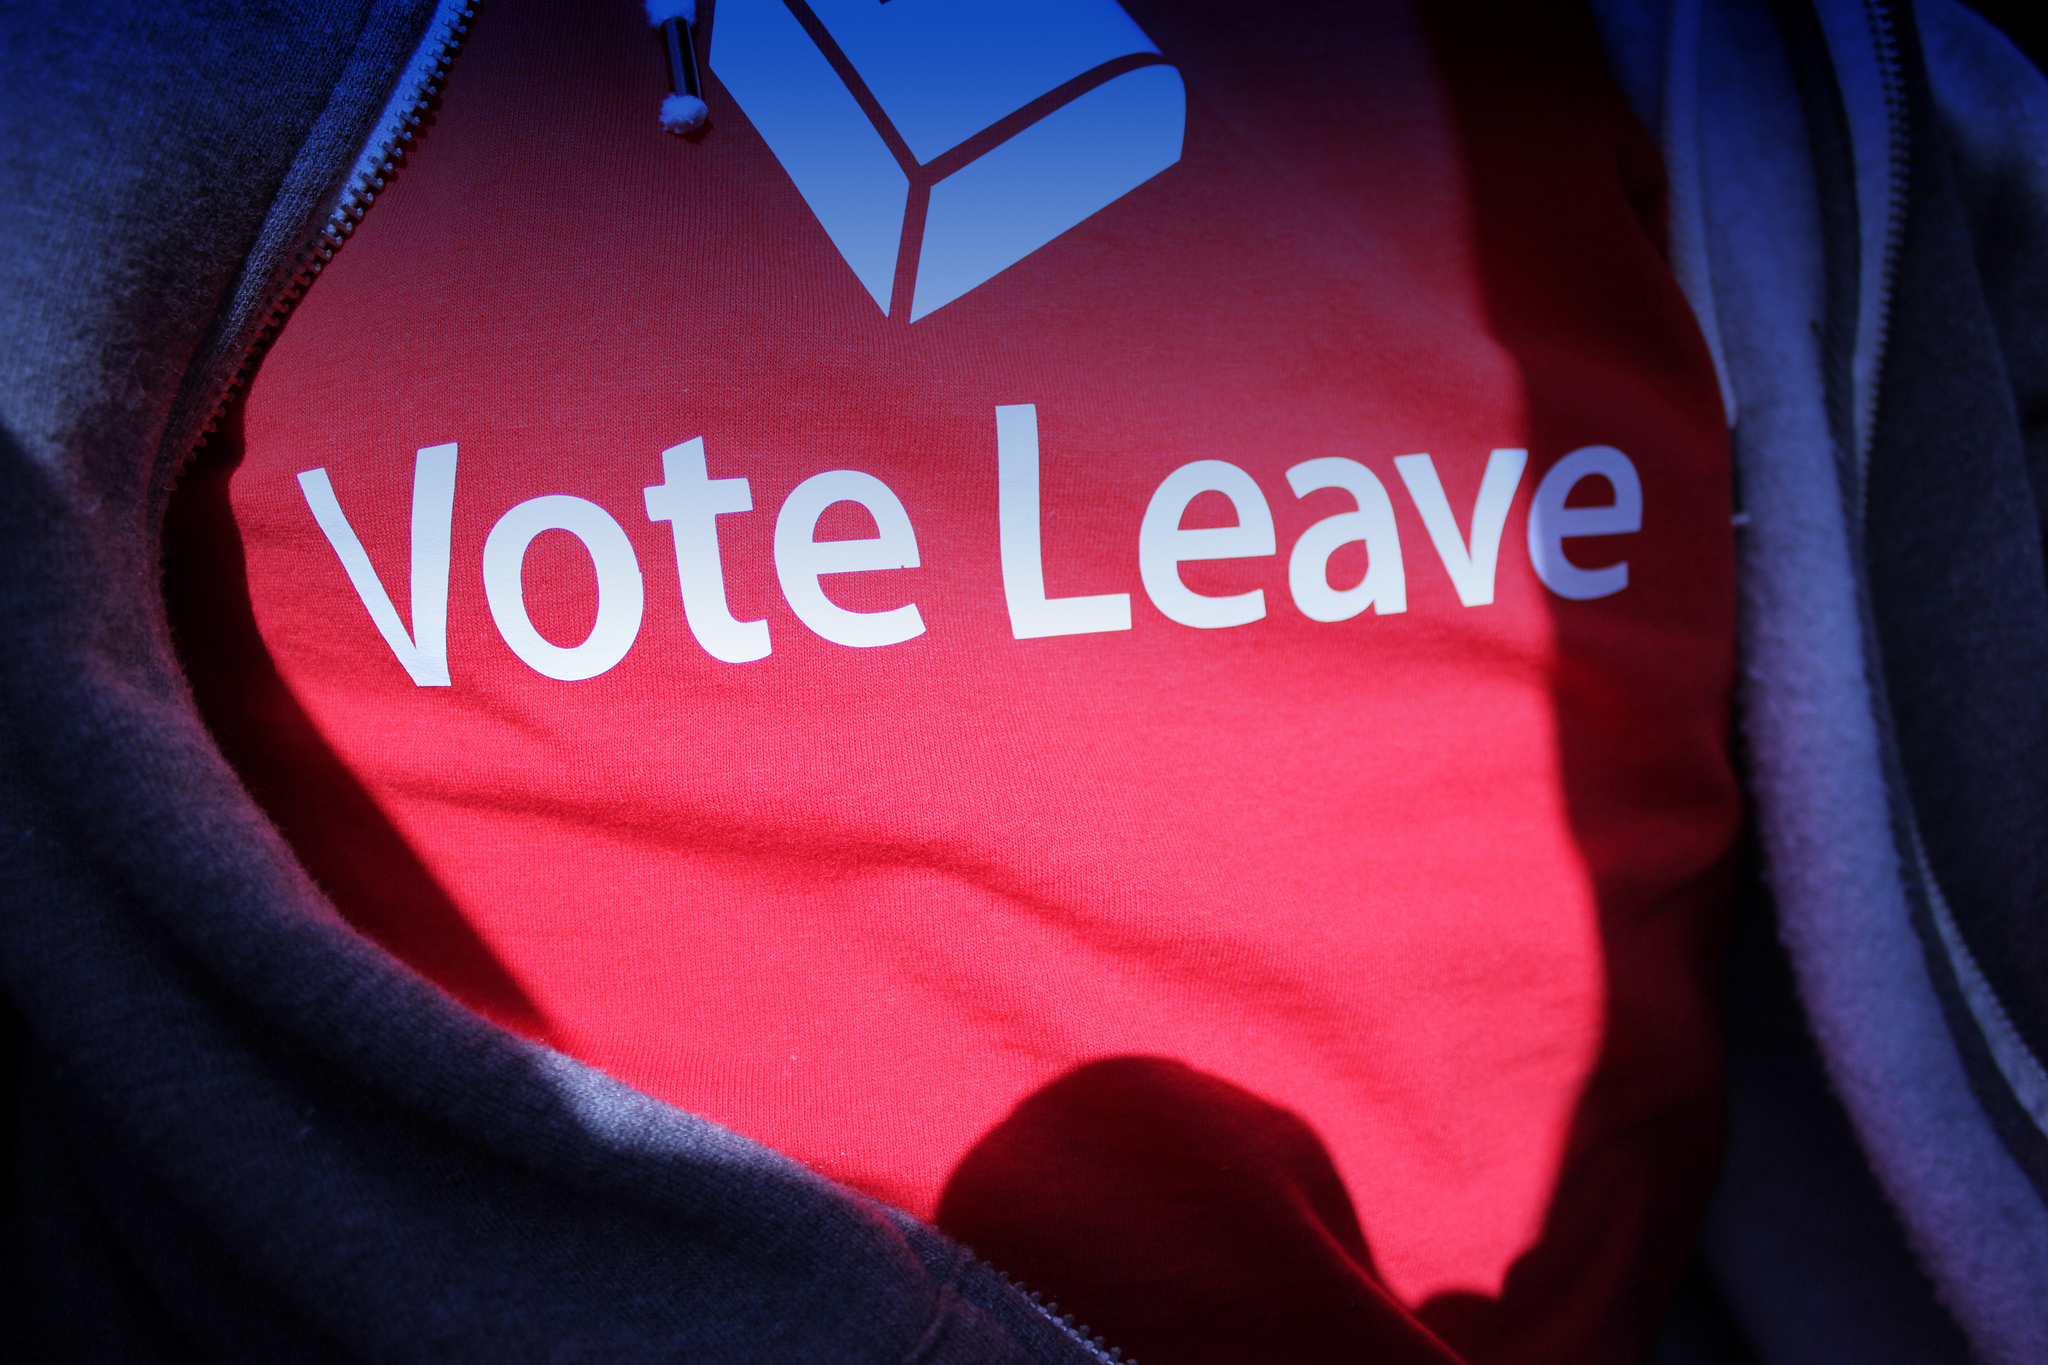 Someone wearing a Vote Leave t-shirt